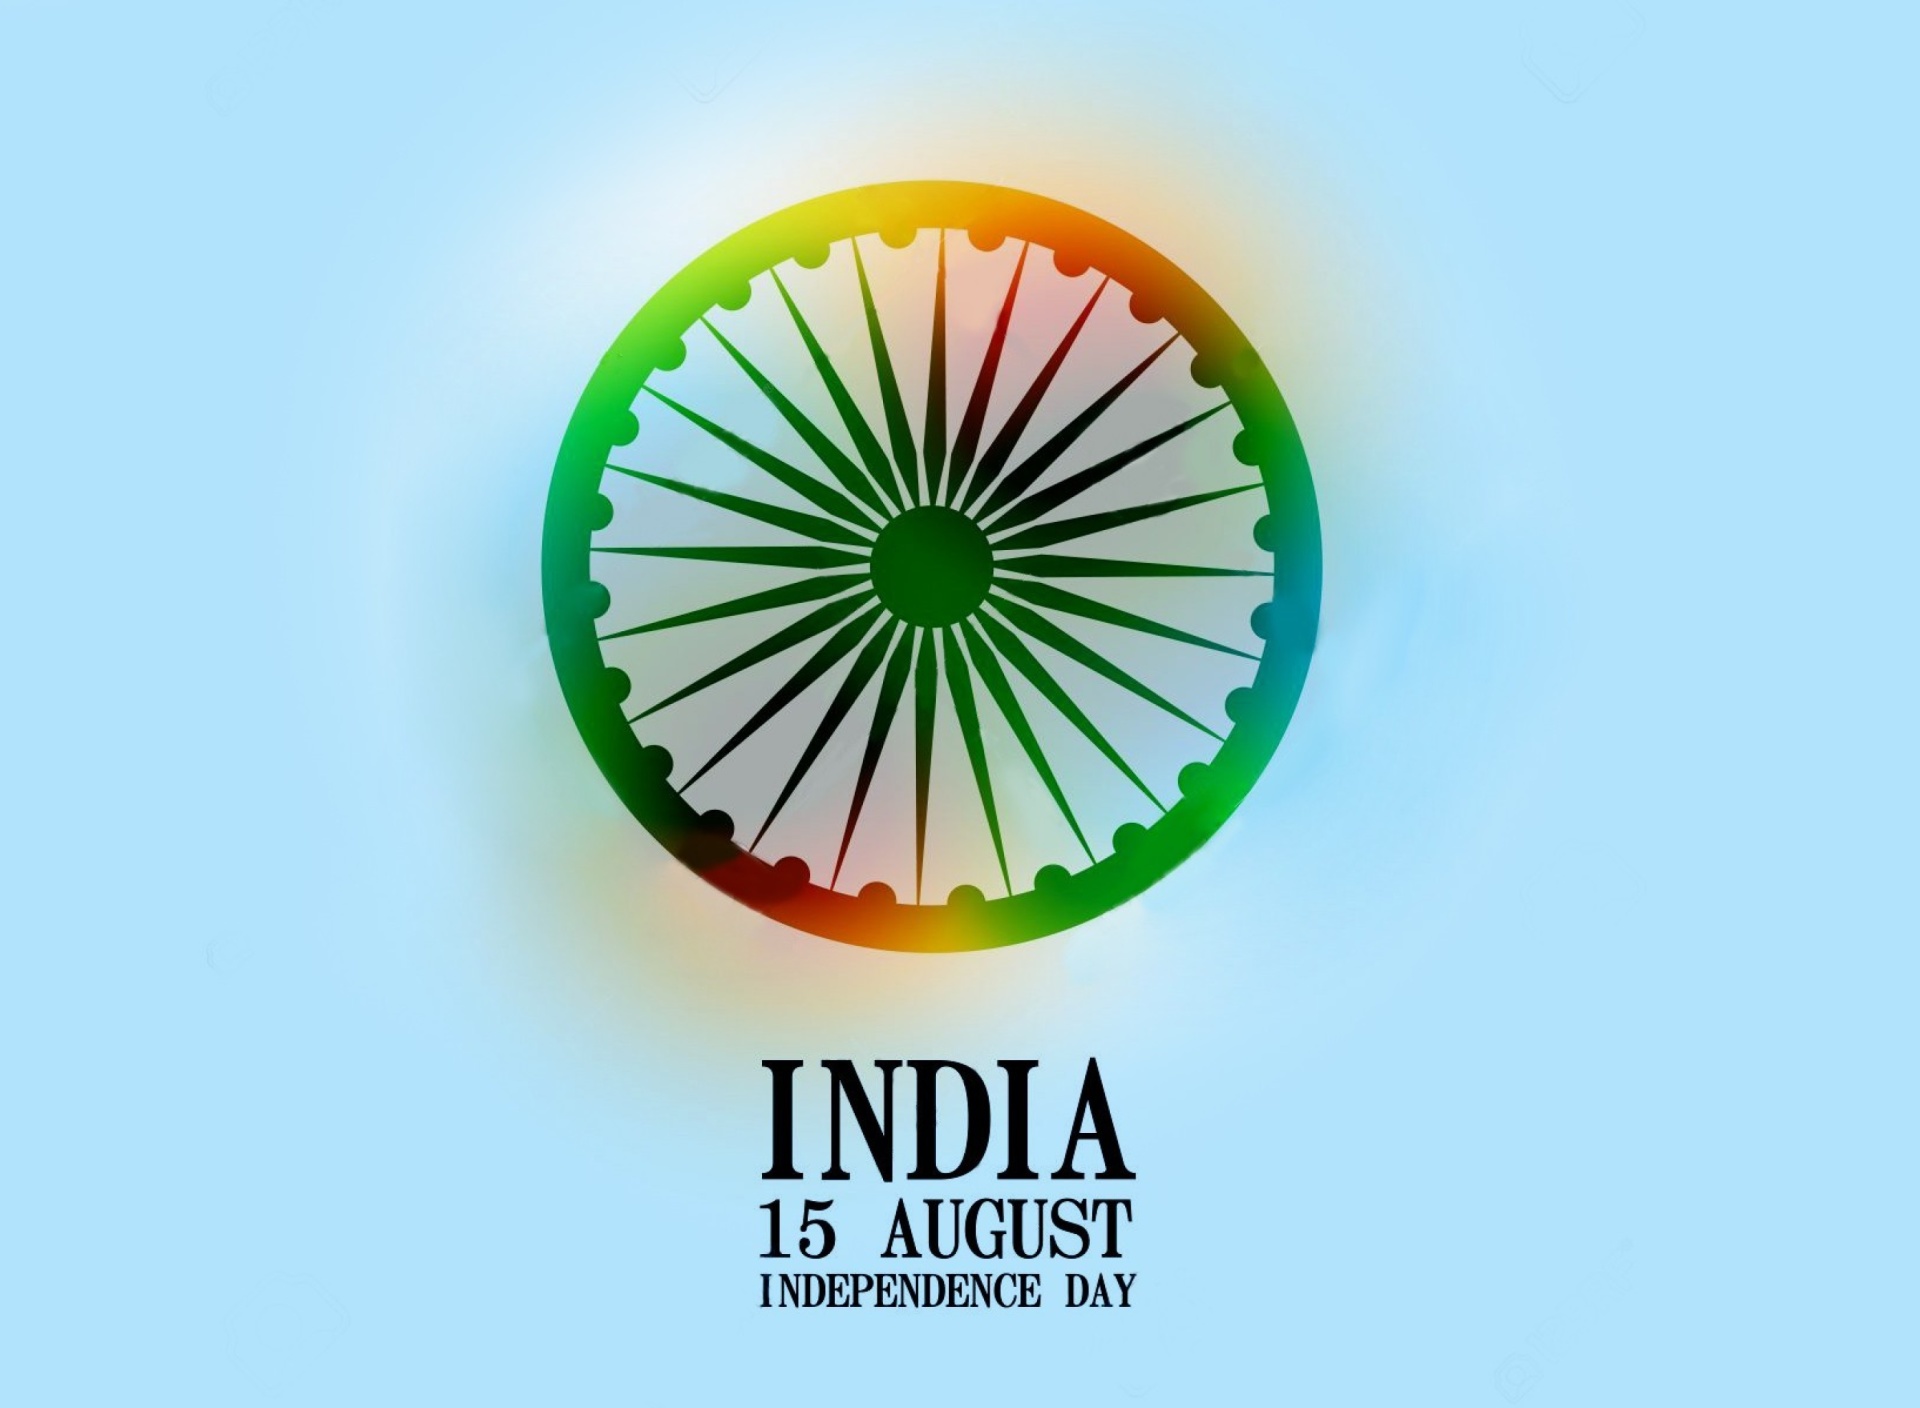 Sfondi India Independence Day 15 August 1920x1408